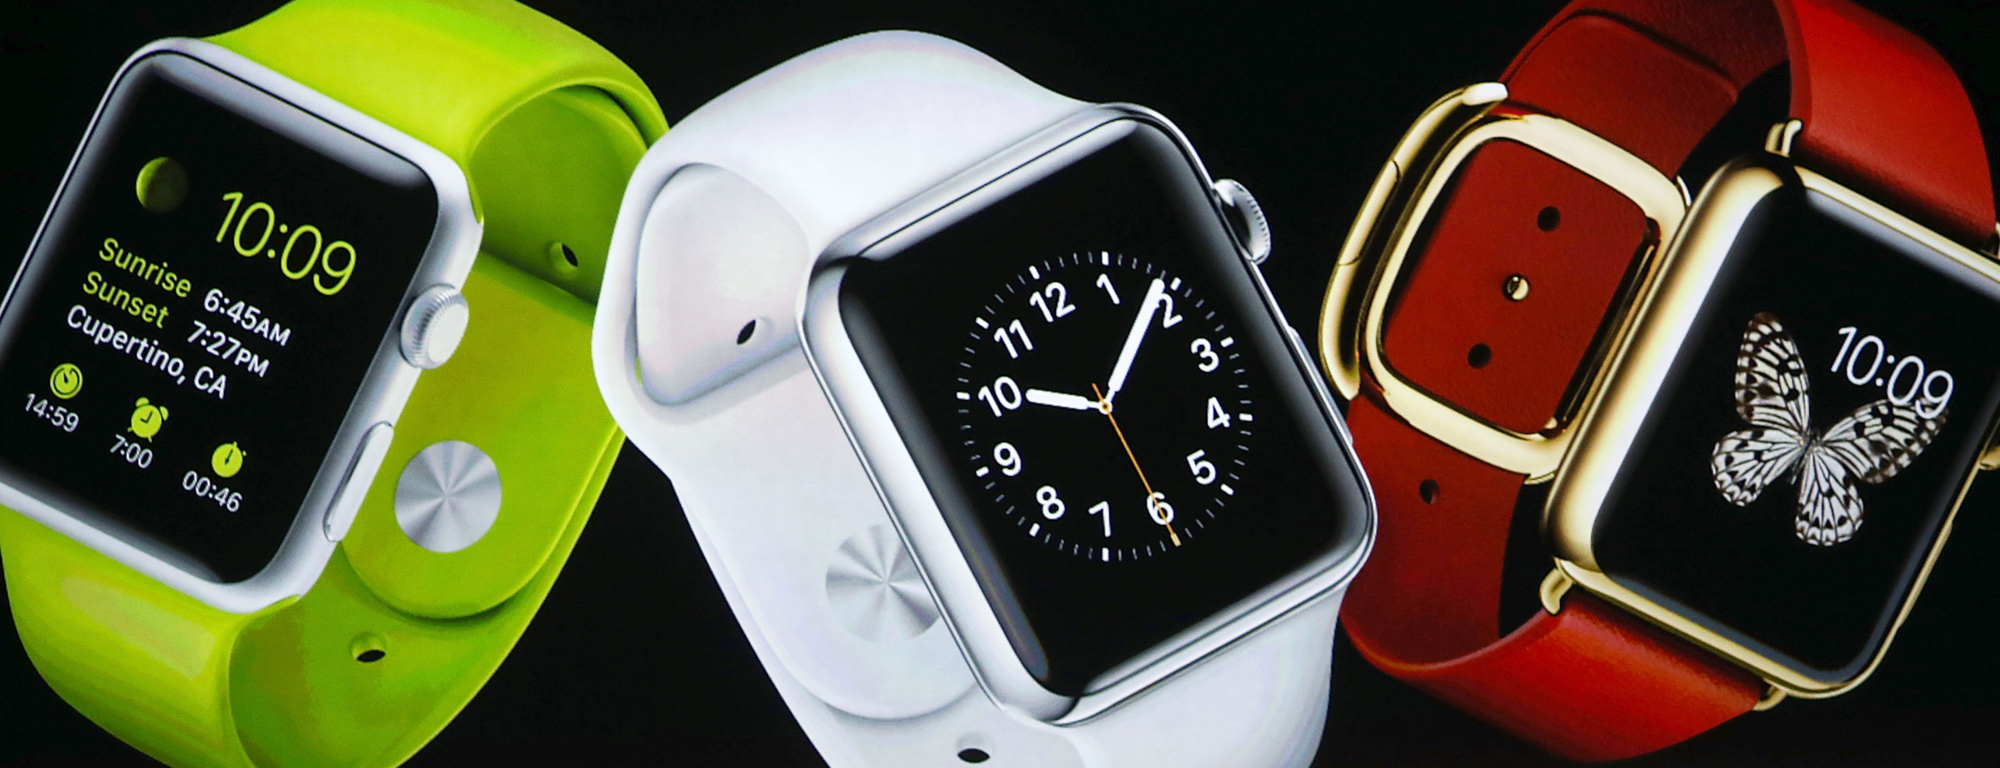 AppleWatch Andro Dollar 2 - Apple unveils the Apple Watch